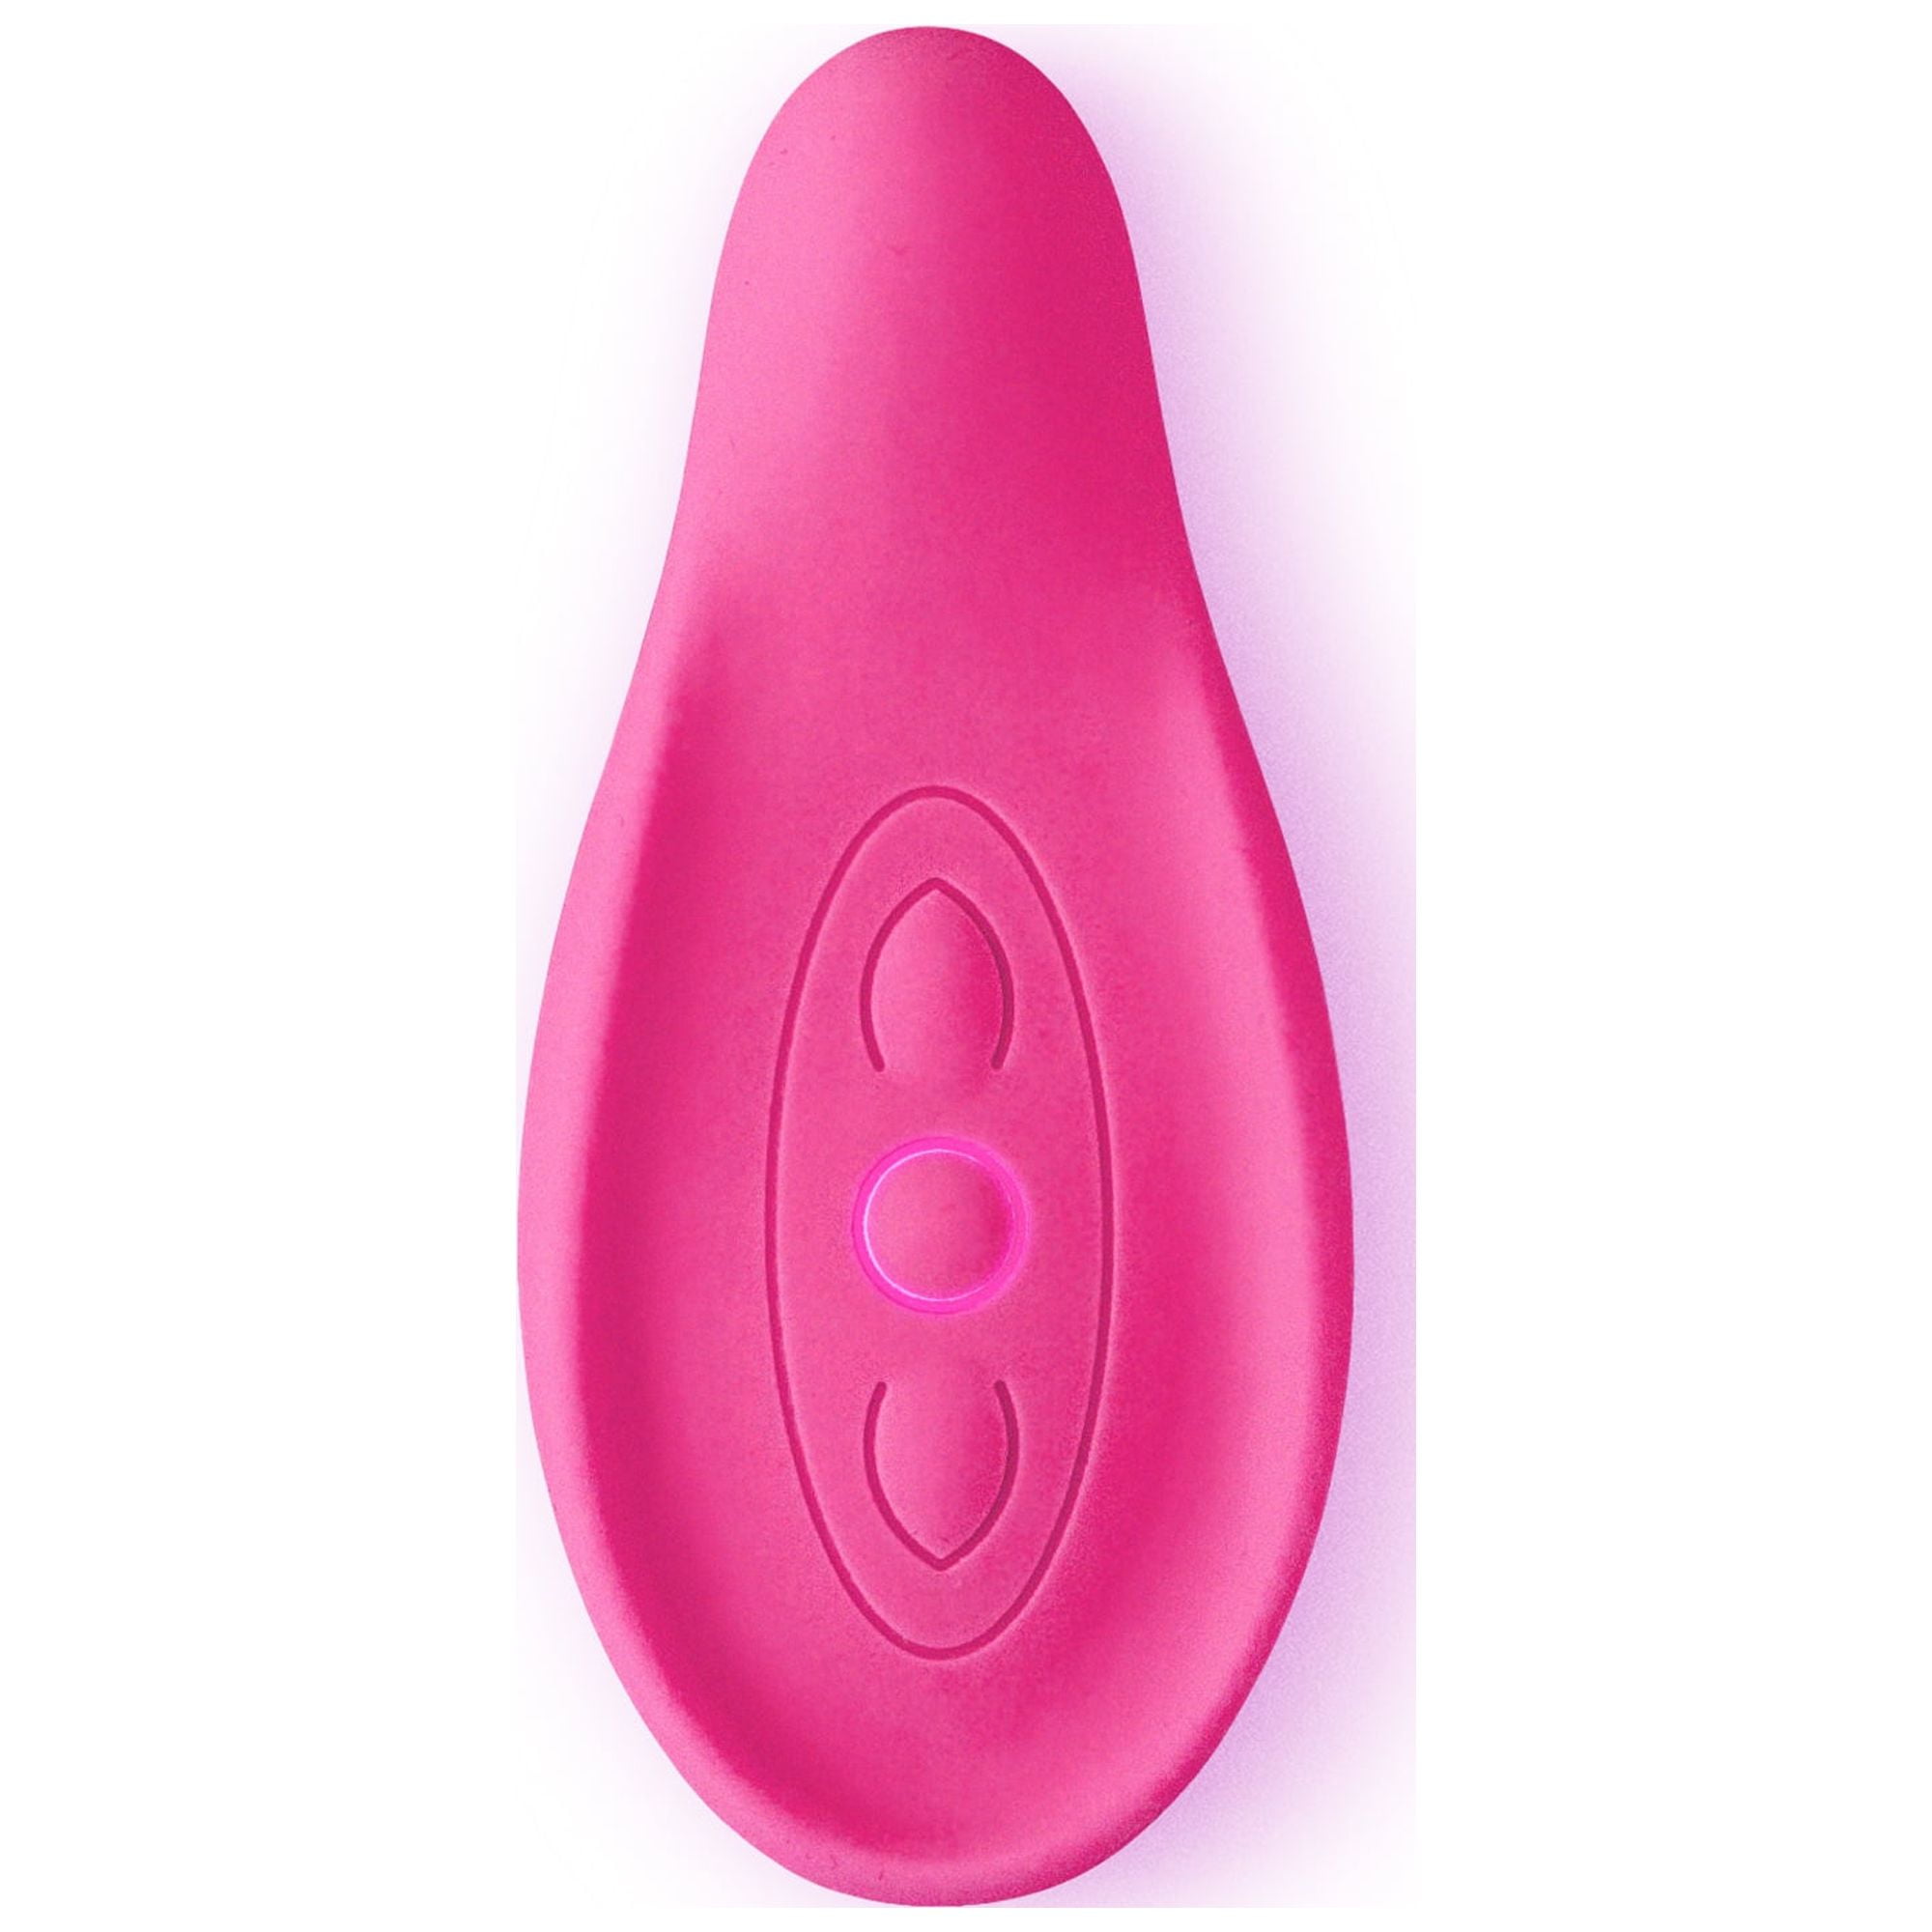 MISSAA Lactation Massager, Soft & Warm Breast Massager Breastfeeding,  Lactation Massager with Heat for Clogged Milk Duct Relief, Pumping,  Mastitis